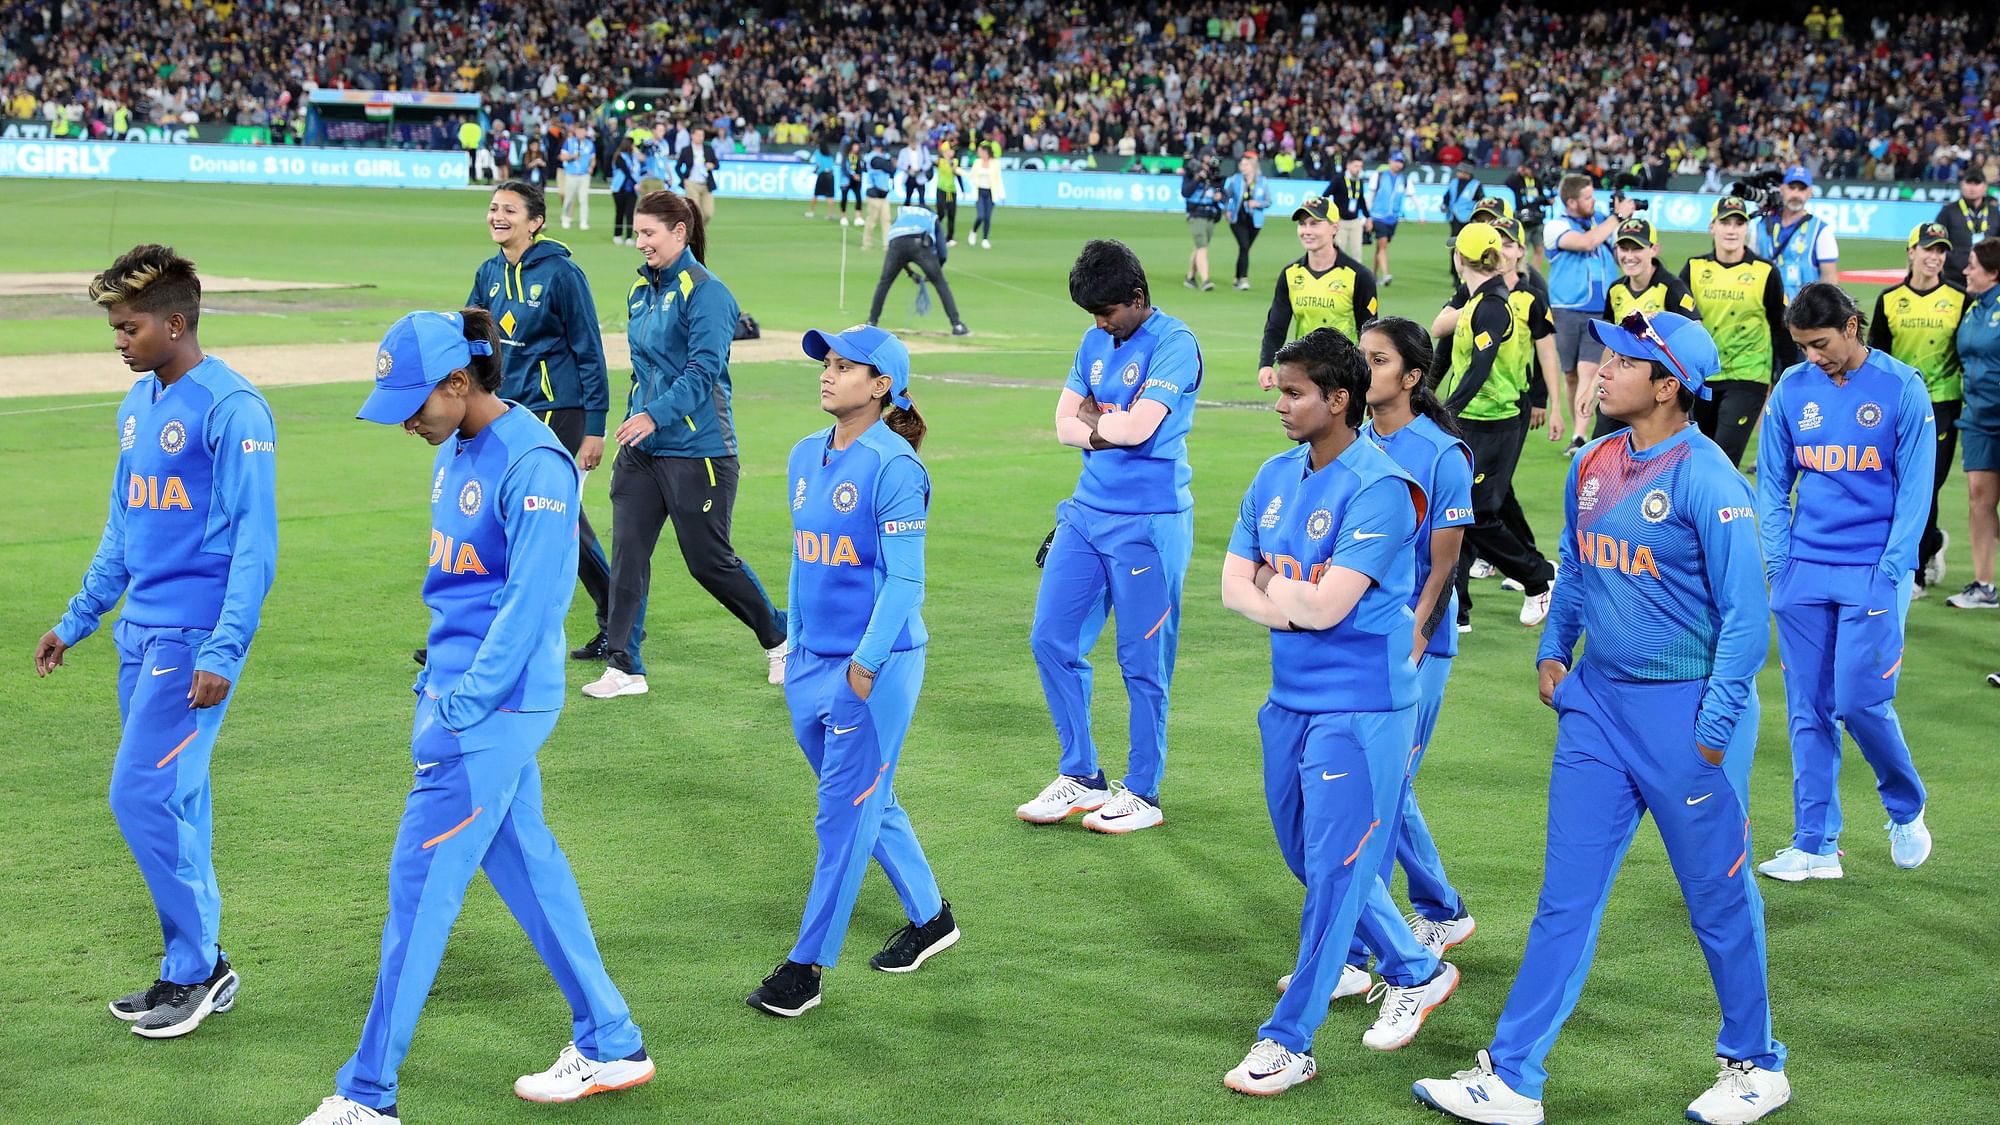 The Indian team walk around the stadium after losing the Women’s T20 World Cup.